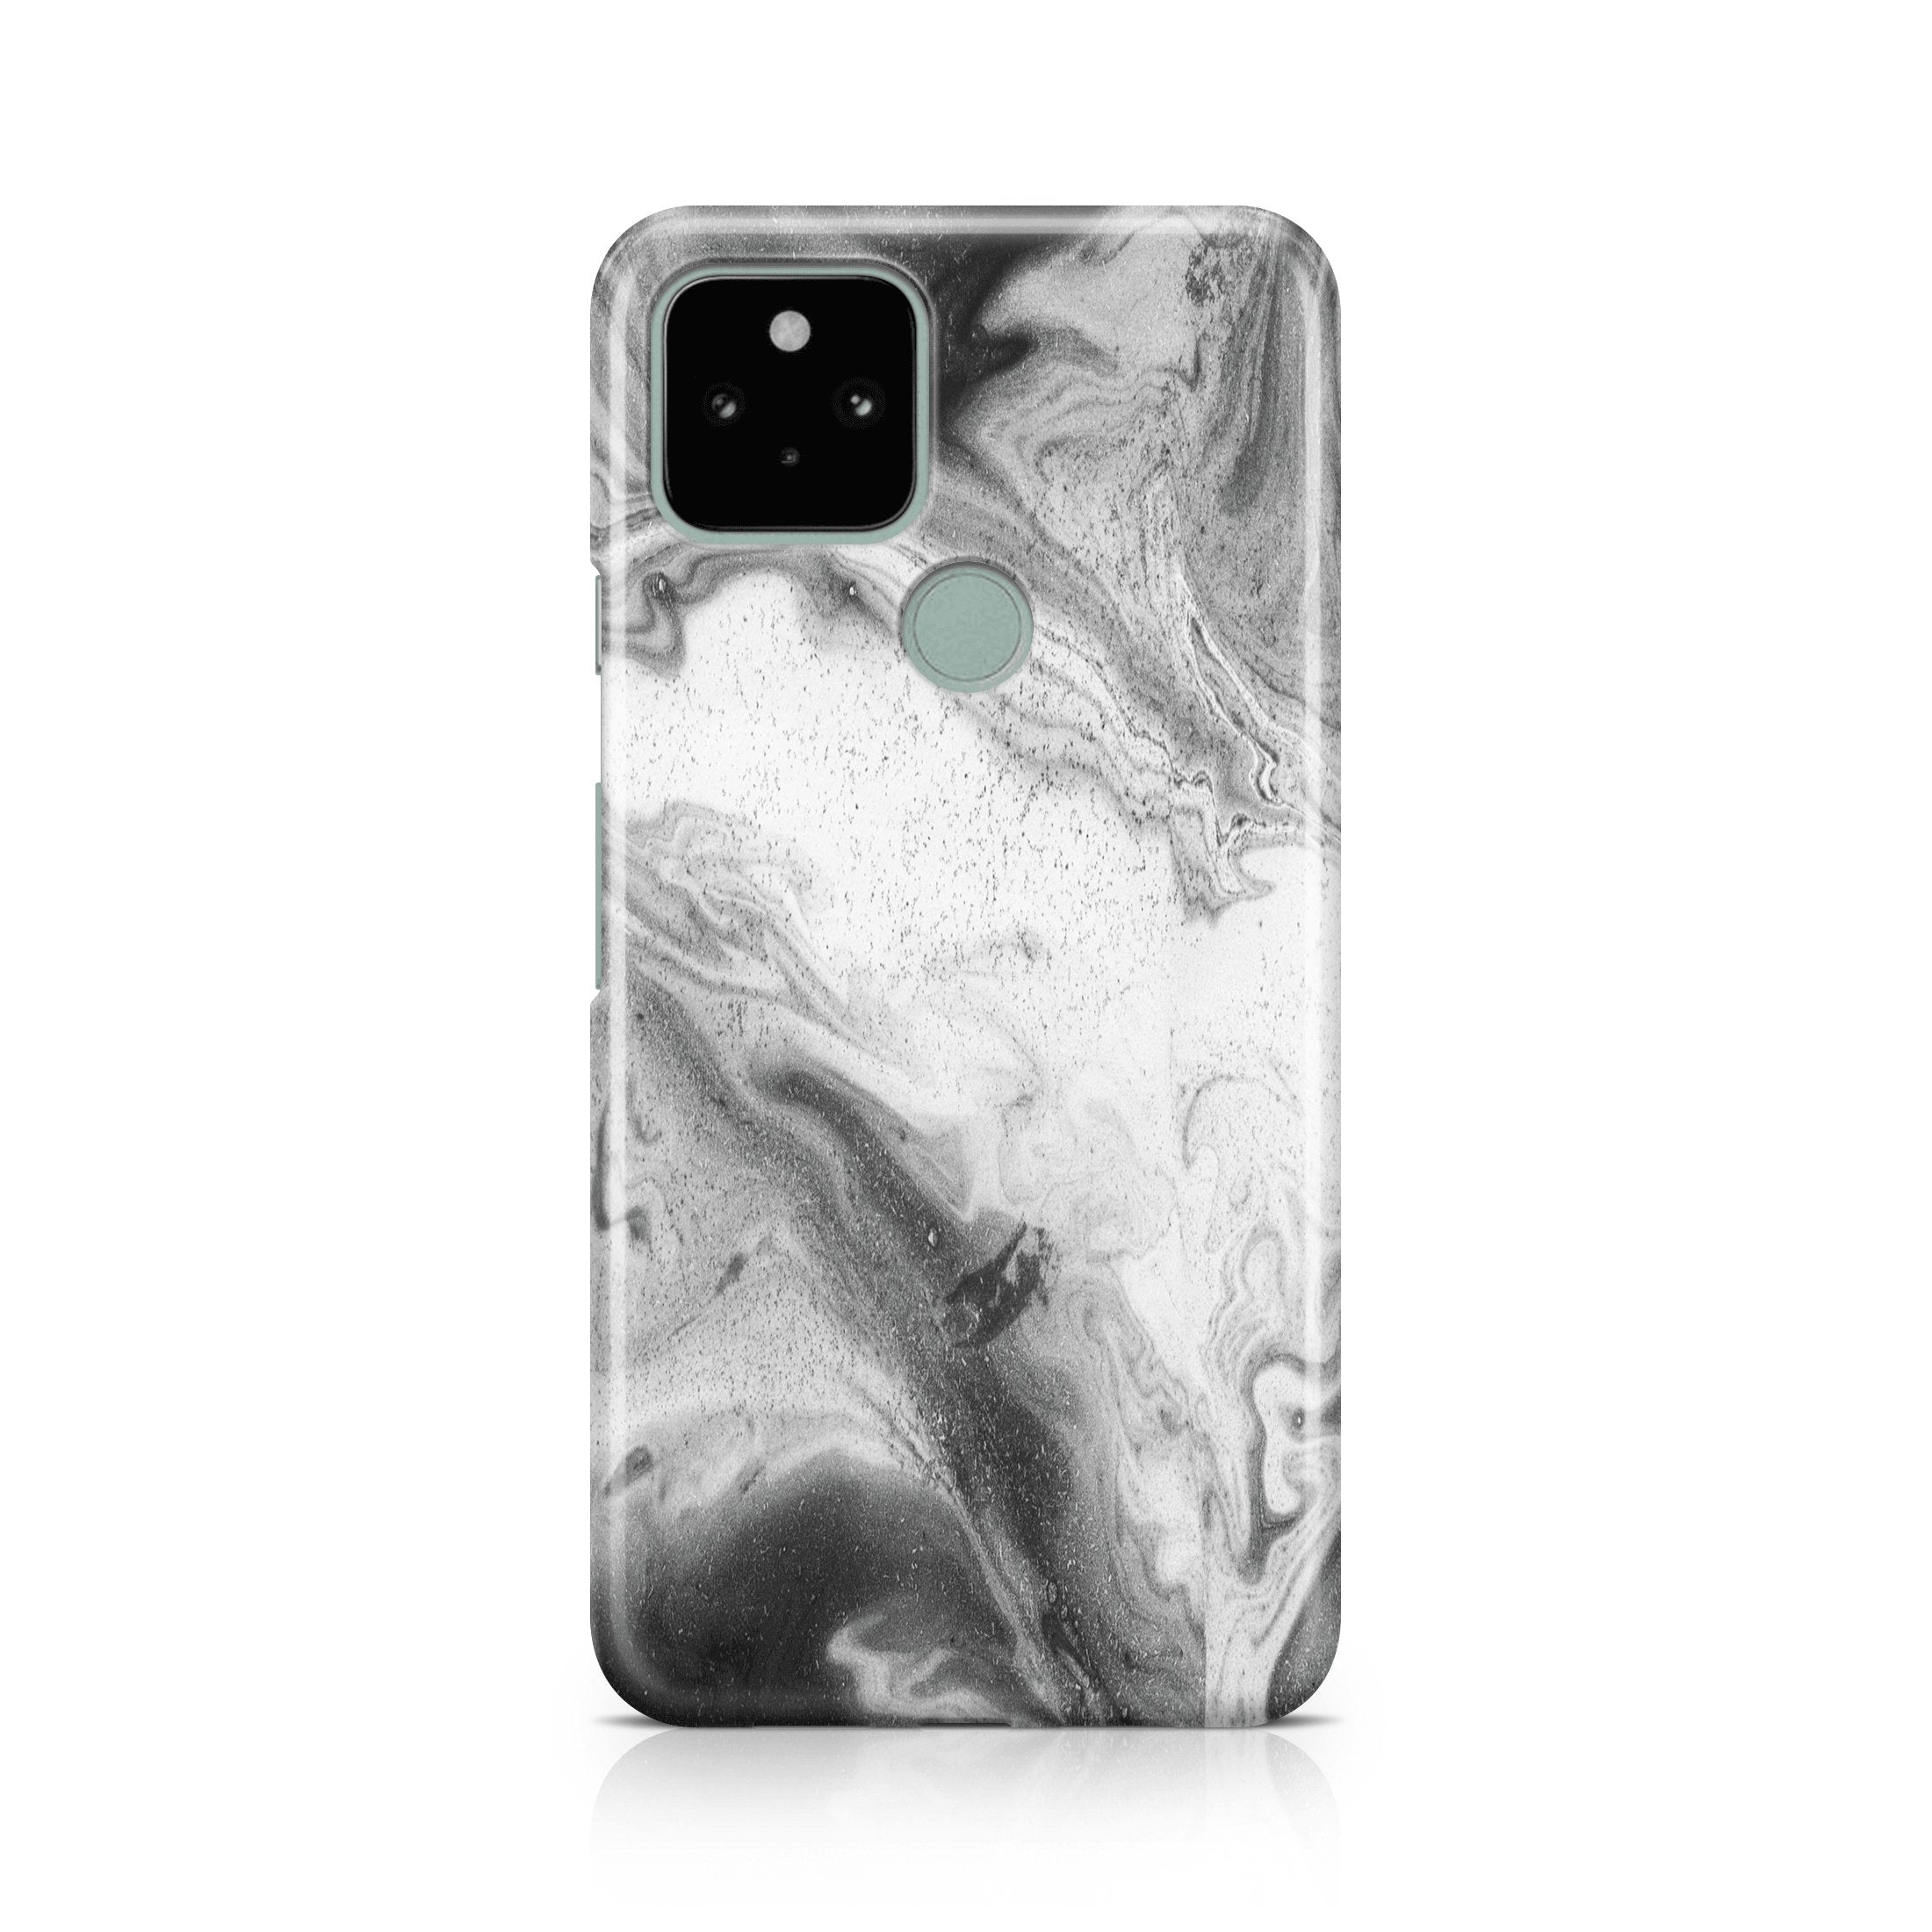 Black & White Marble Series III - Google phone case designs by CaseSwagger